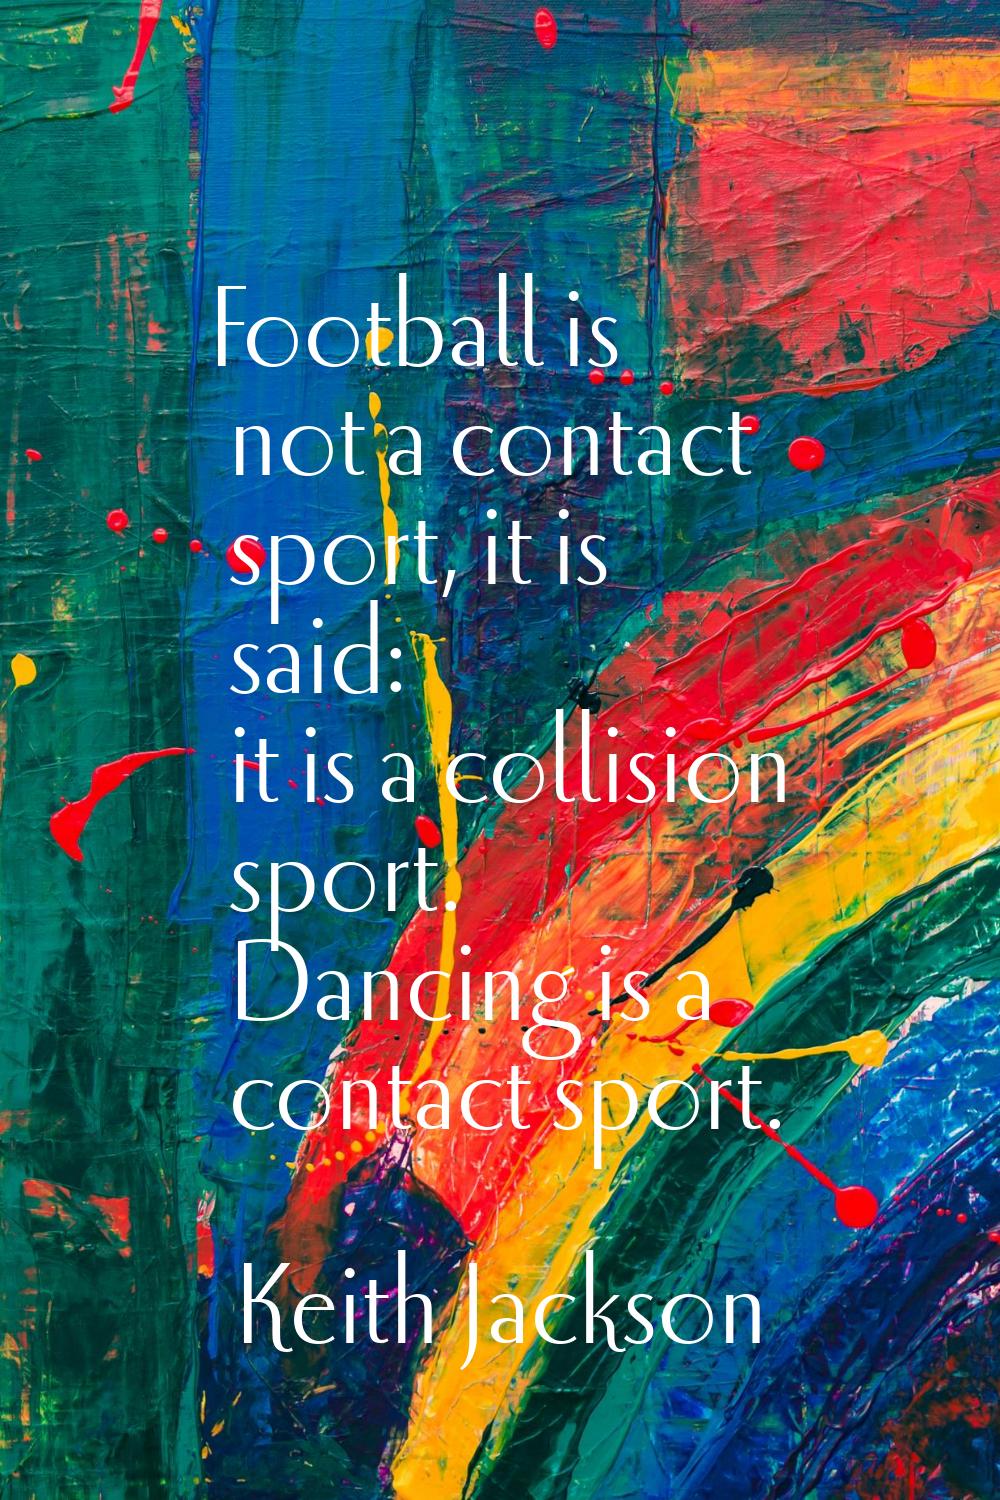 Football is not a contact sport, it is said: it is a collision sport. Dancing is a contact sport.